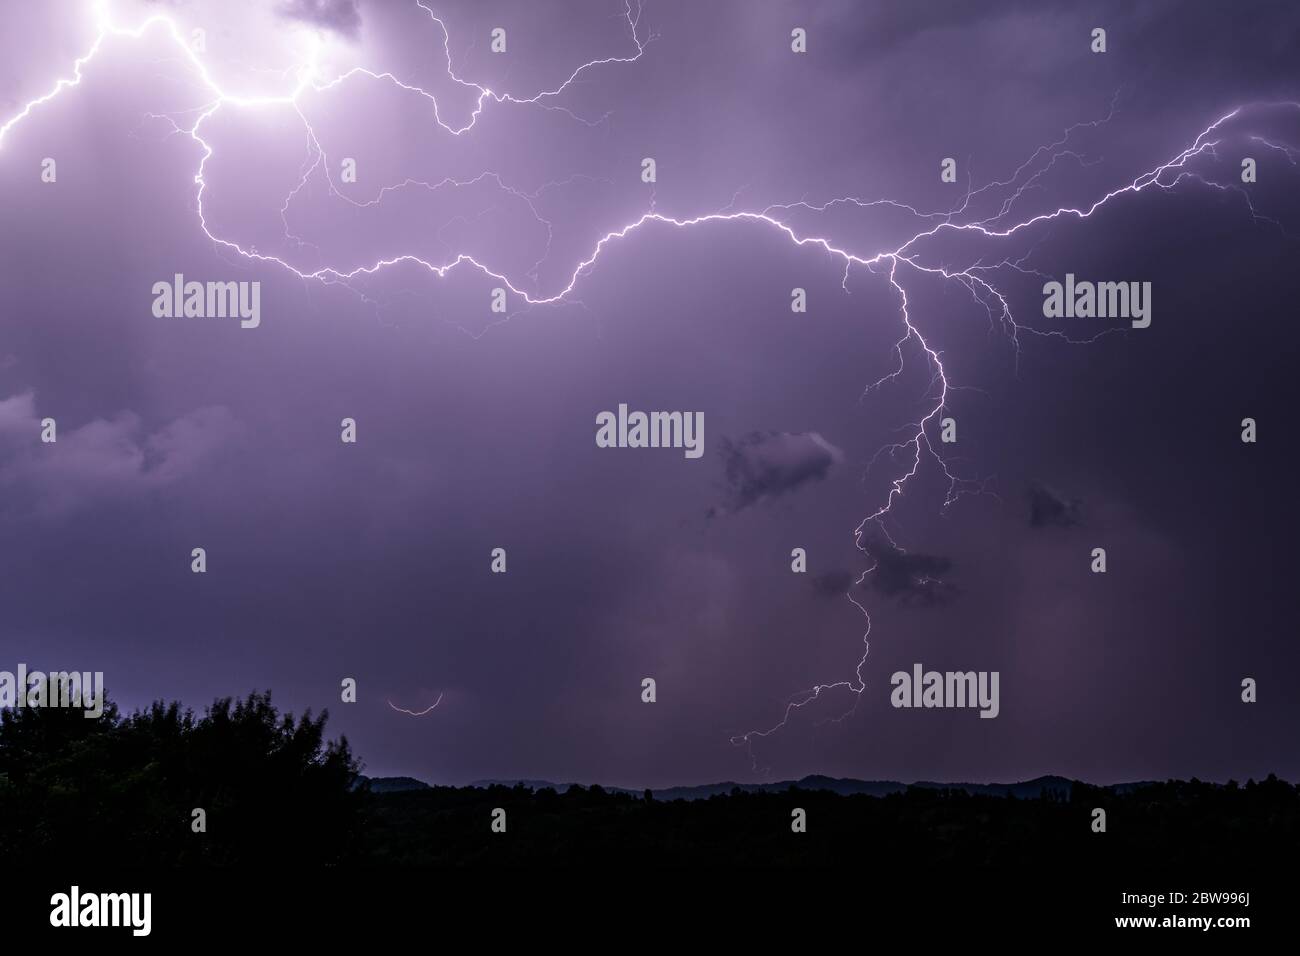 Powerful and dramatic lightning falling onto the ground during heavy thunderstorm in Romania's mountains Stock Photo